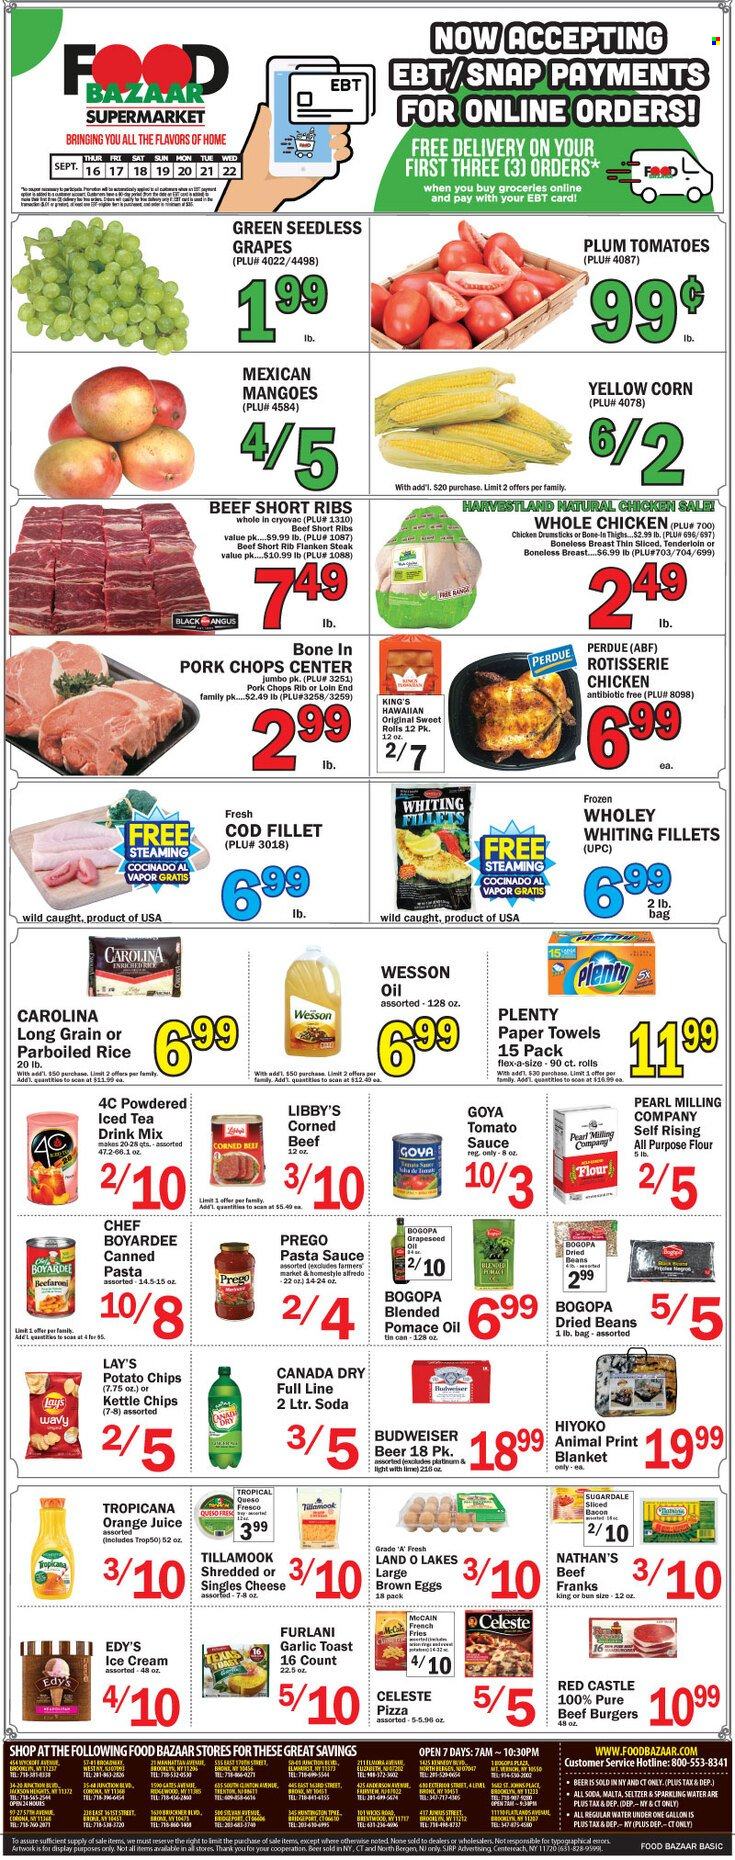 thumbnail - Food Bazaar Flyer - 09/16/2021 - 09/22/2021 - Sales products - seedless grapes, sweet rolls, beans, corn, grapes, cod, whiting fillets, whiting, pizza, chicken roast, pasta sauce, hamburger, sauce, beef burger, Perdue®, Sugardale, bacon, corned beef, queso fresco, eggs, ice cream, McCain, potato fries, Celeste, 7 Days, potato chips, Lay’s, all purpose flour, flour, tomato sauce, Goya, Chef Boyardee, rice, parboiled rice, oil, Canada Dry, juice, ice tea, seltzer water, soda, sparkling water, beer, Castle, whole chicken, chicken drumsticks, beef meat, beef ribs, steak, pork chops, pork meat, Budweiser. Page 1.